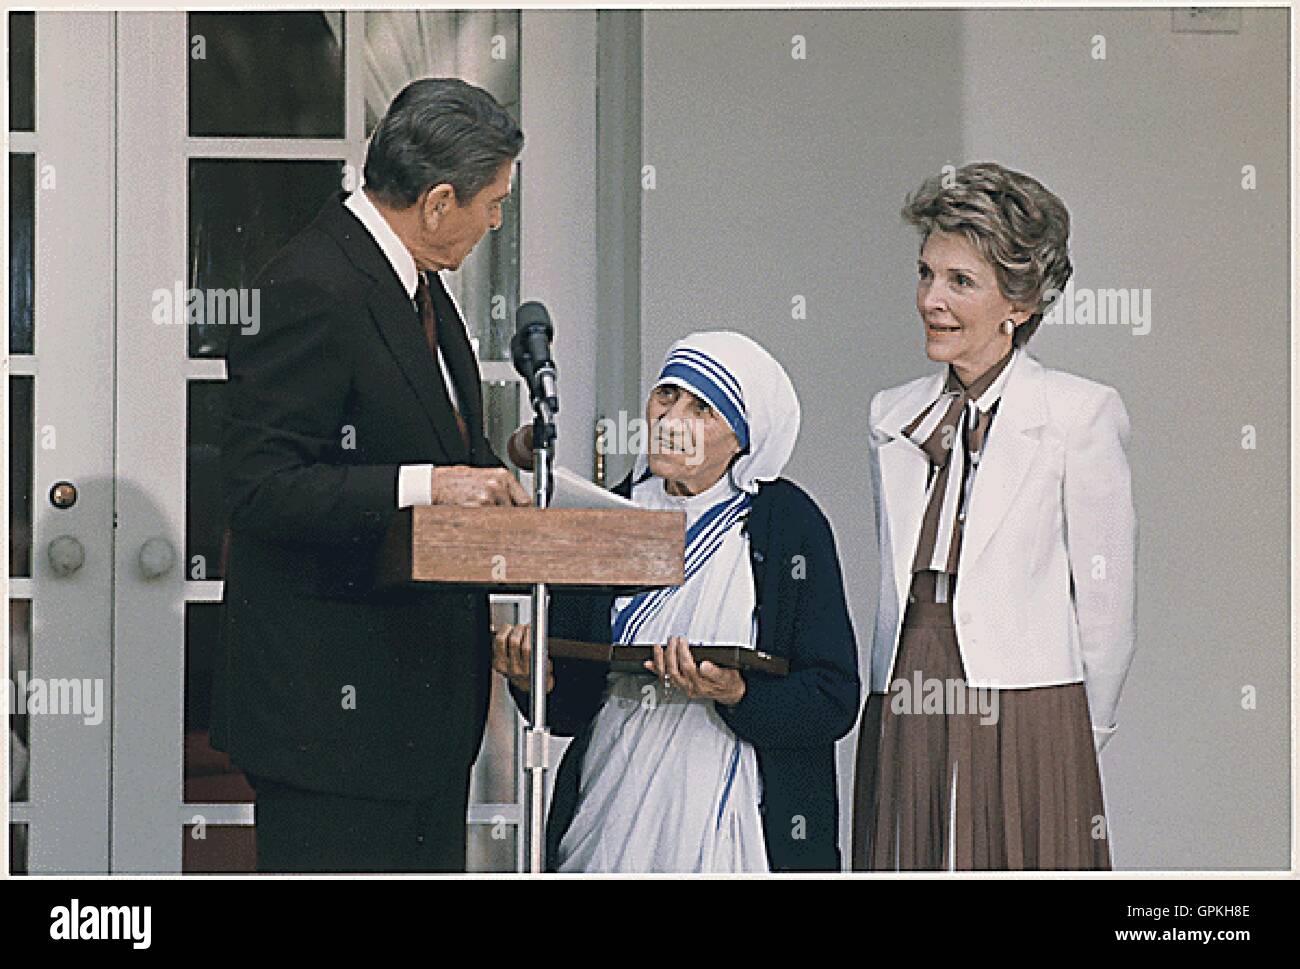 U.S. President Ronald Reagan and First Lady Nancy Reagan present Mother Teresa with the Medal of Freedom at a White House Ceremony on June 20, 1985. Credit: White House via CNP - NO WIRE SERVICE - Stock Photo